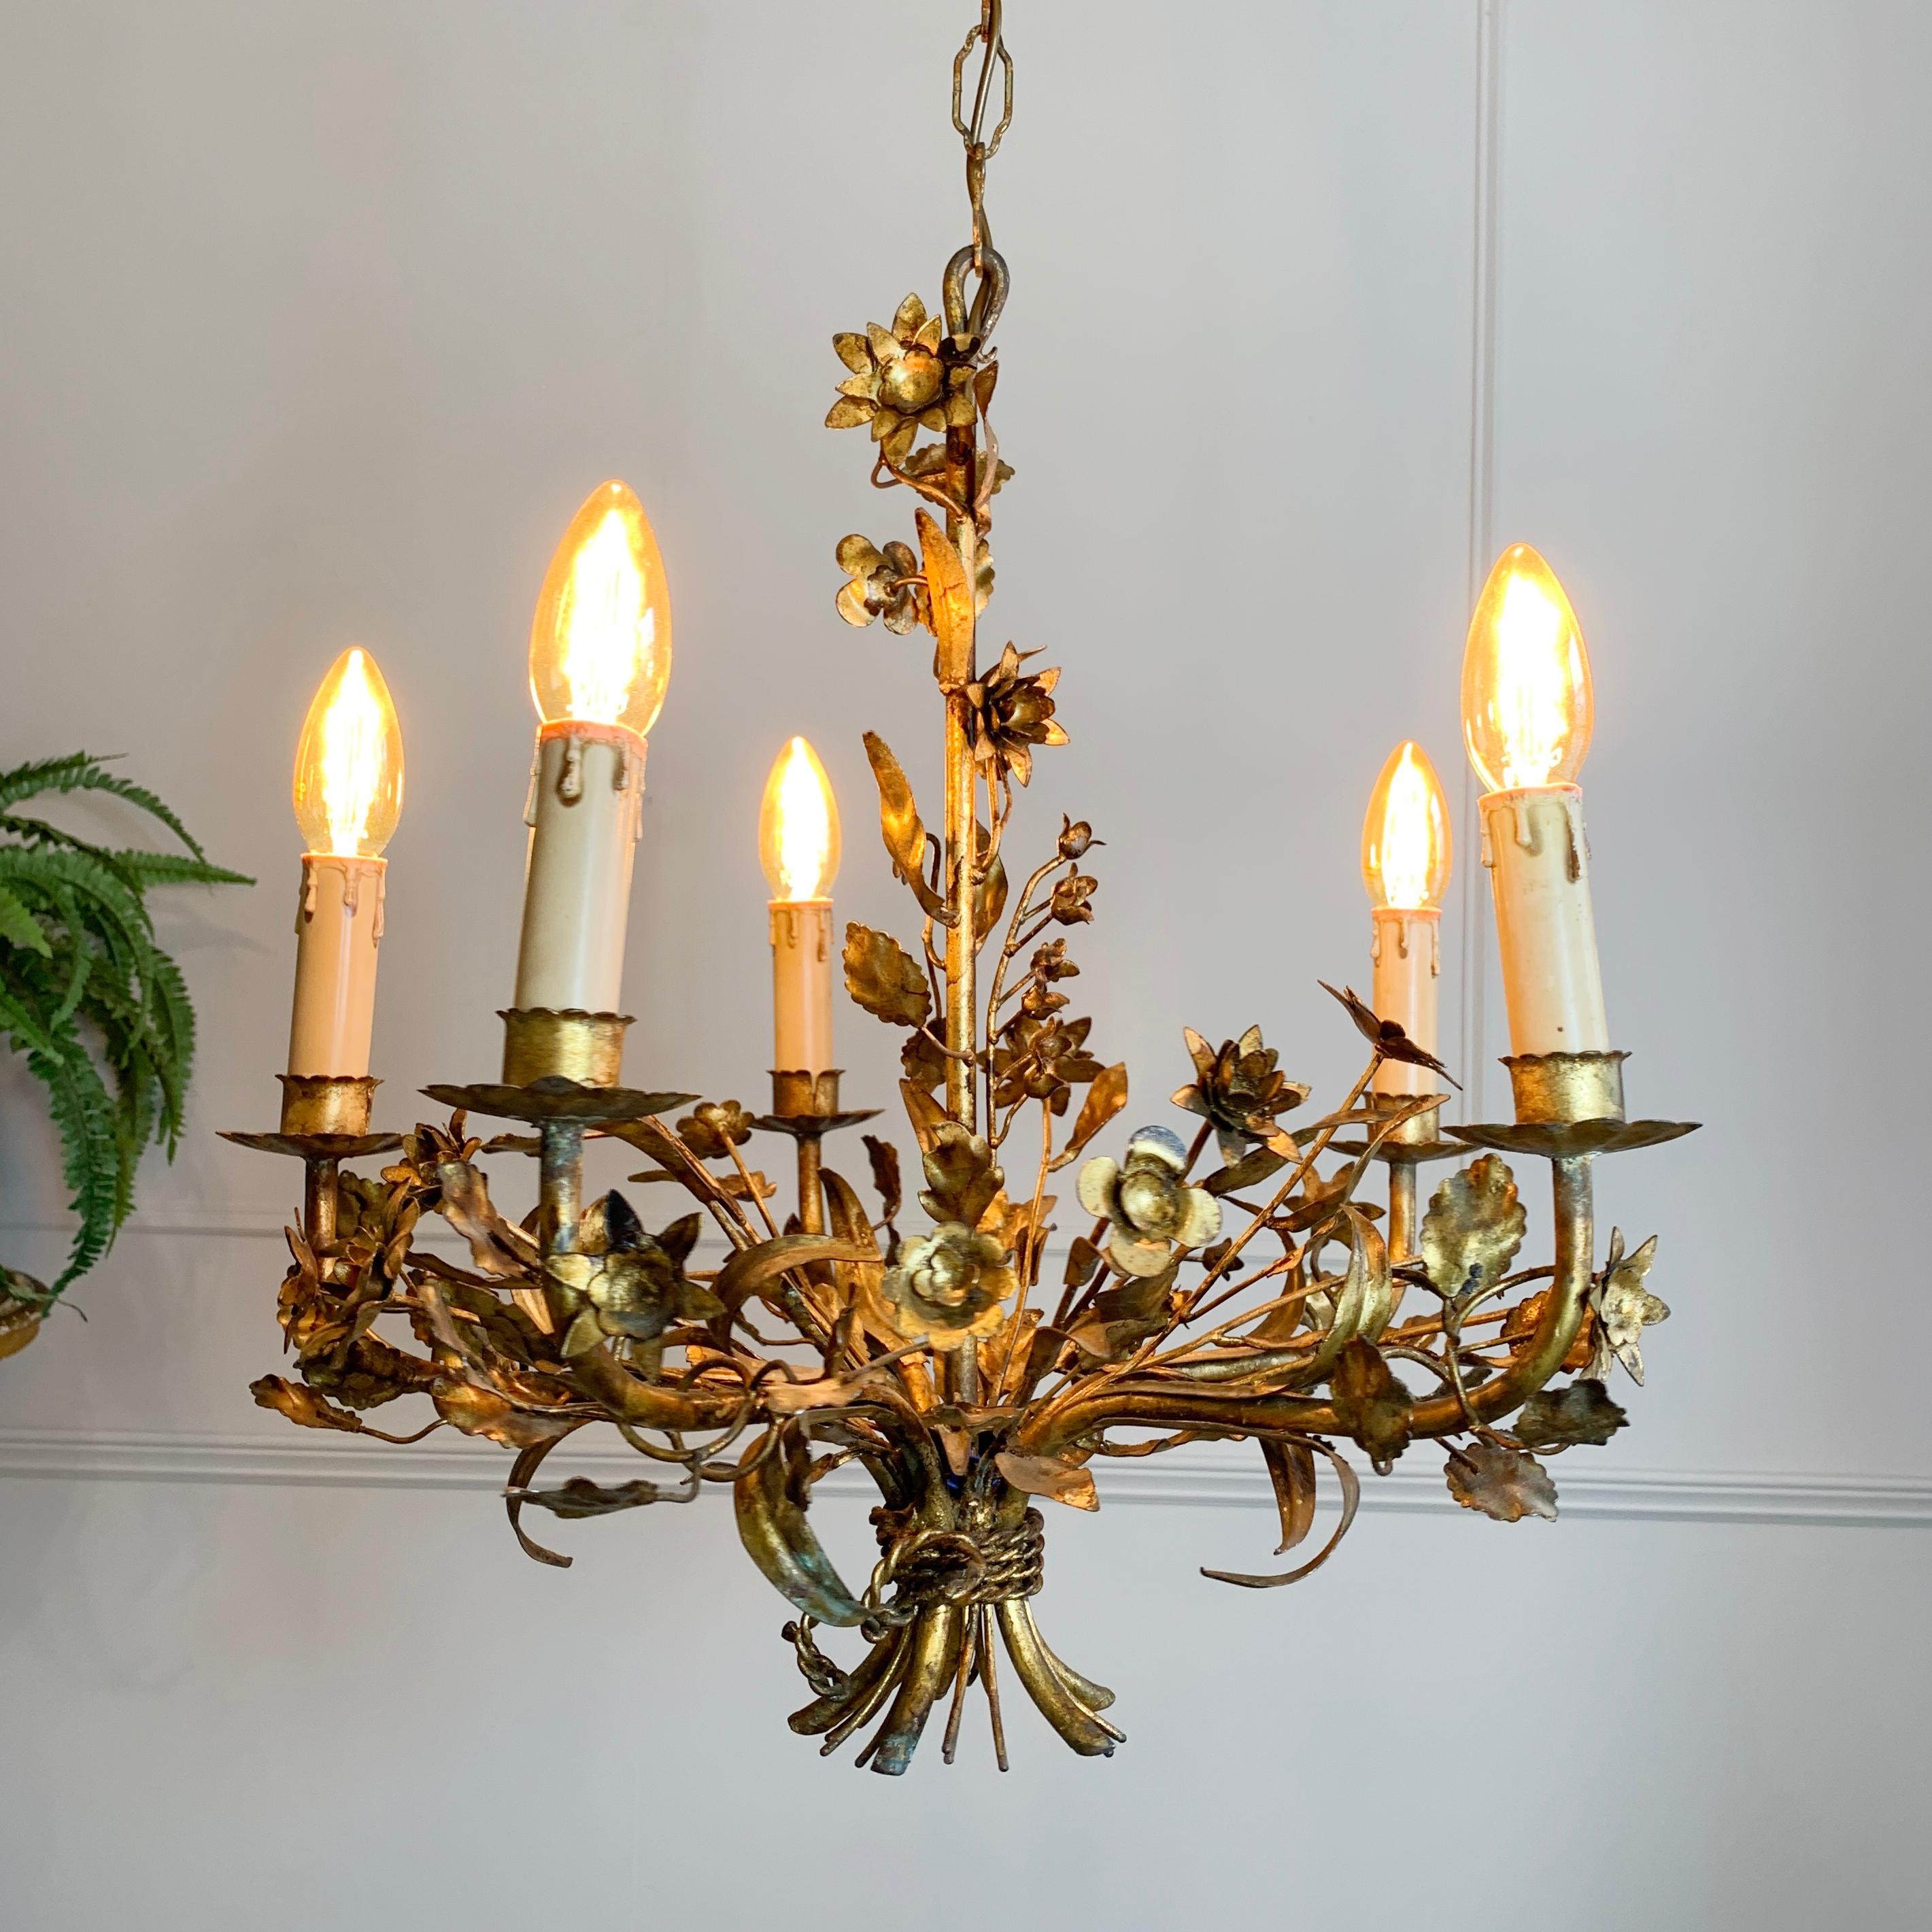 1940's gilt French flowers chandelier
The light is filled with beautifully handcrafted metal flowers and leaves, entwined around the main stem and arms of the chandelier
The light is an original vintage piece so has signs of wear and use
Total